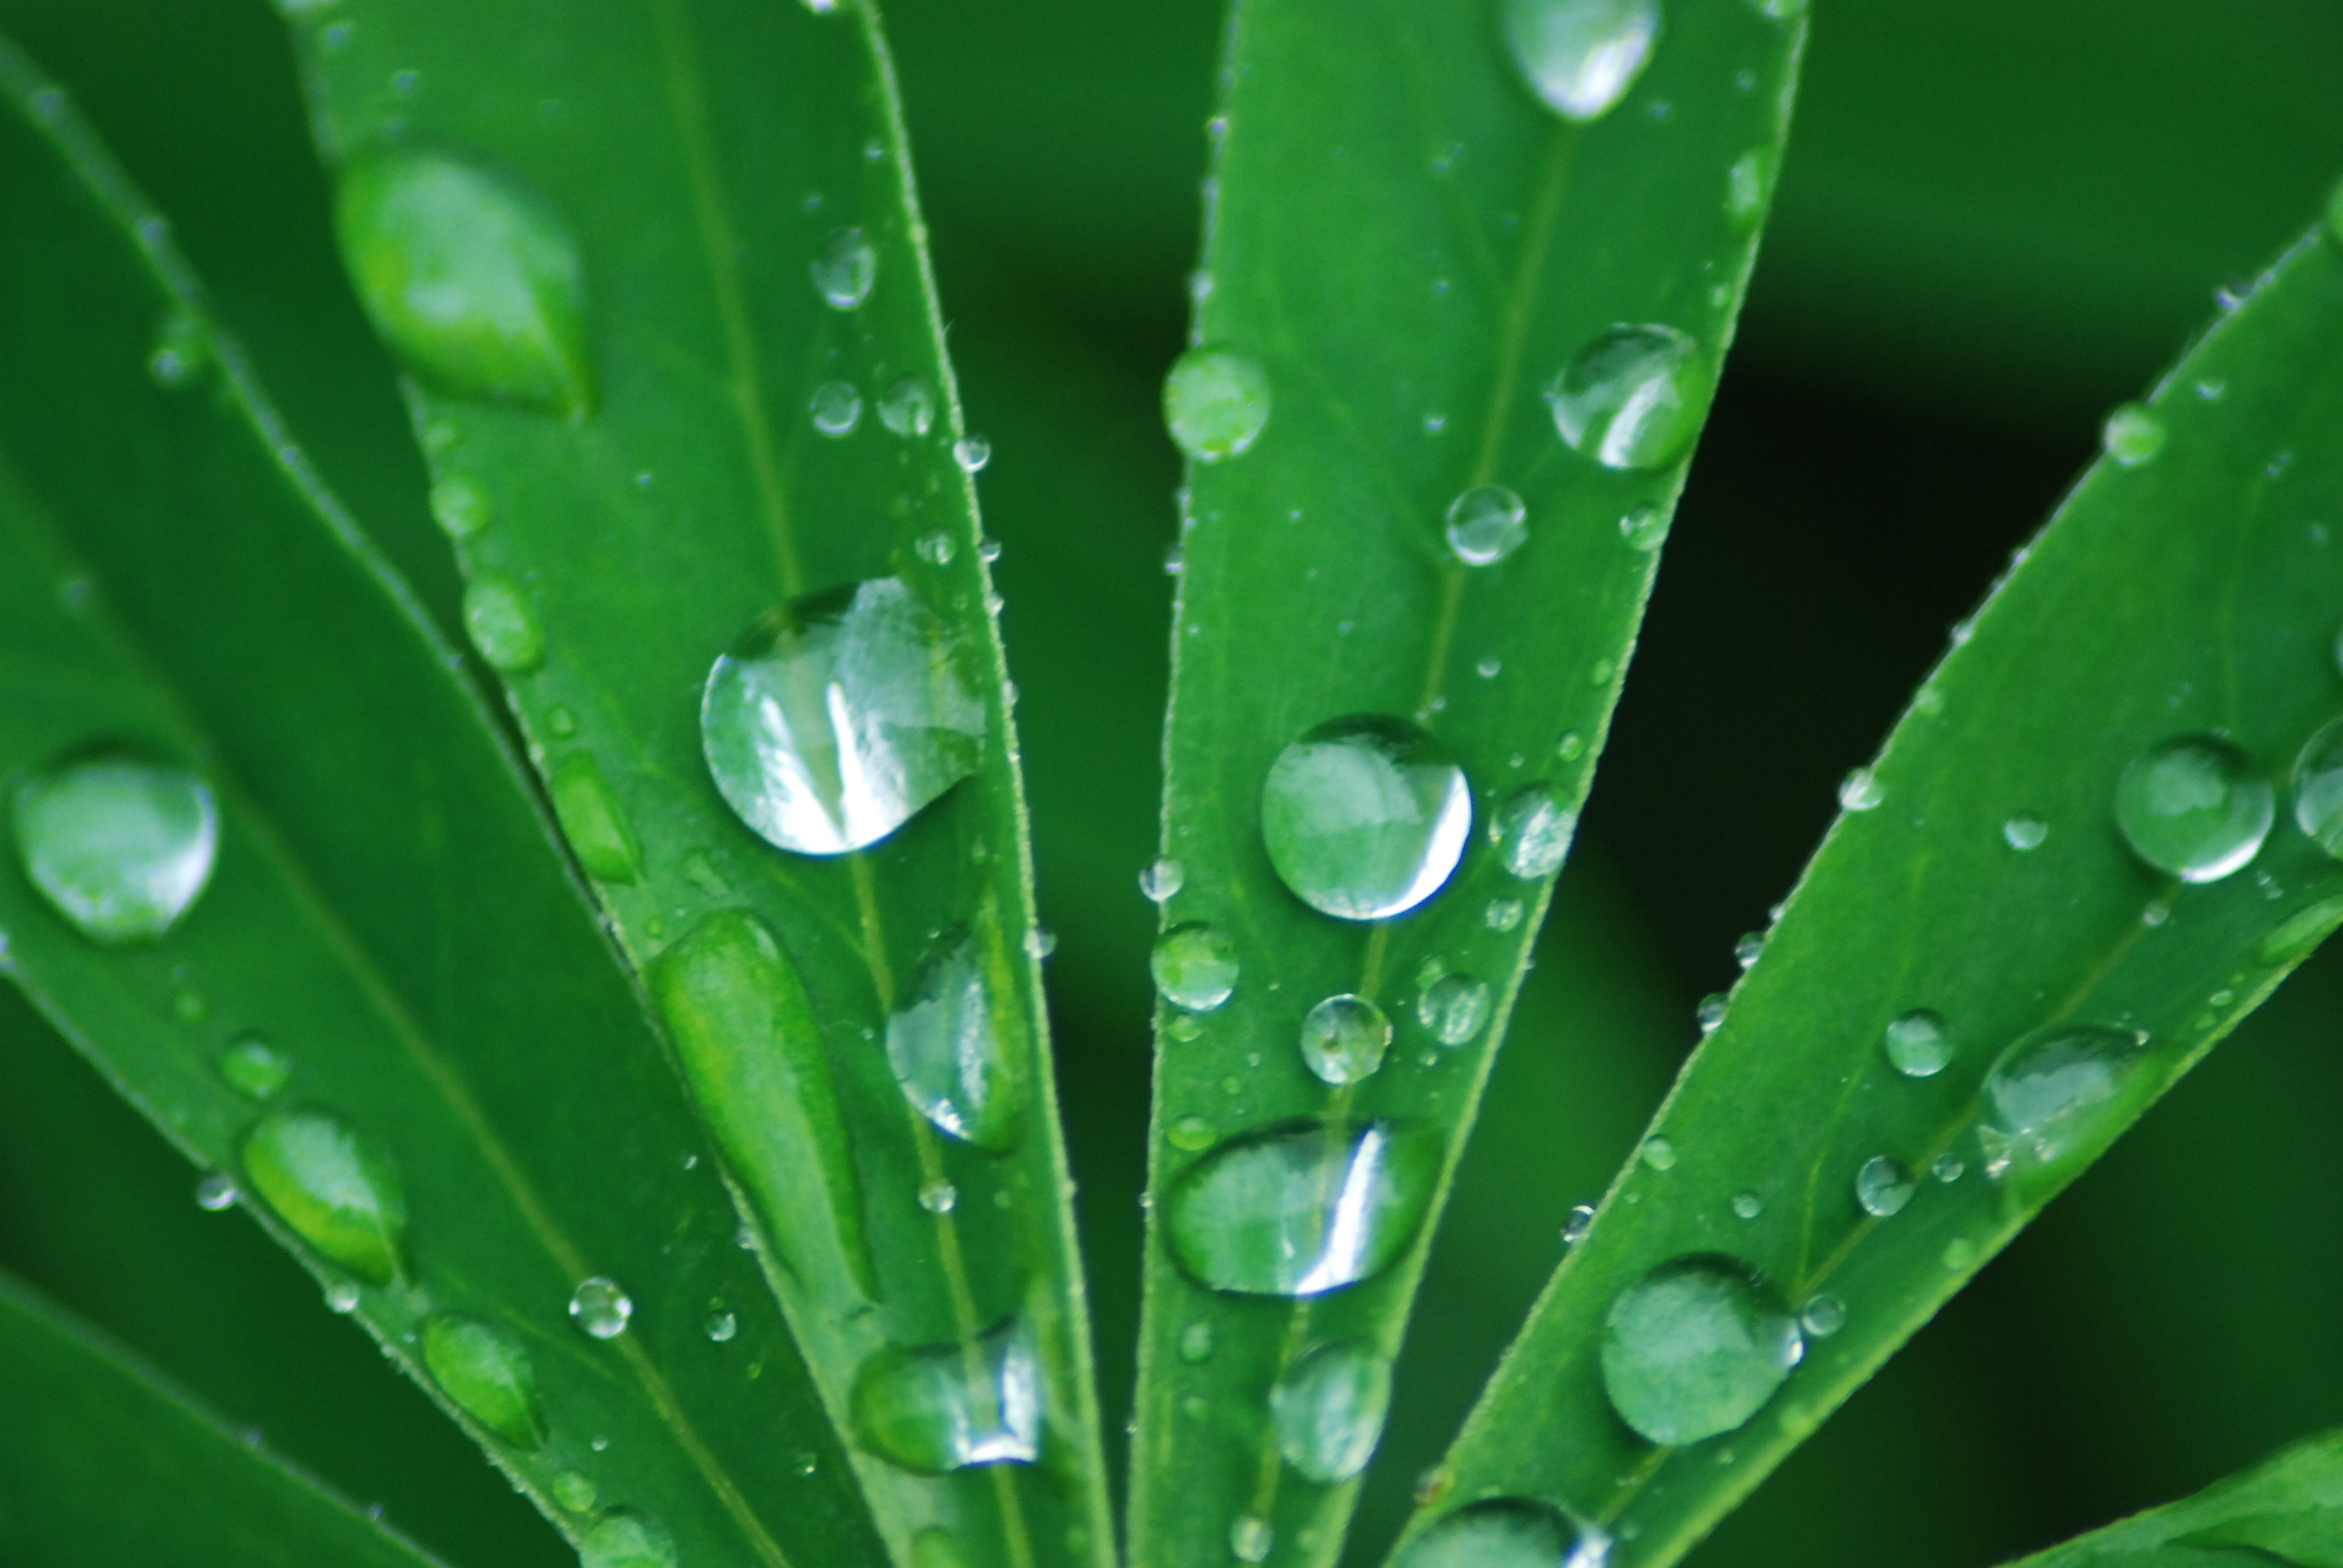 1920x1080 Resolution Water Droplets On Green Leaves Hd Wallpaper